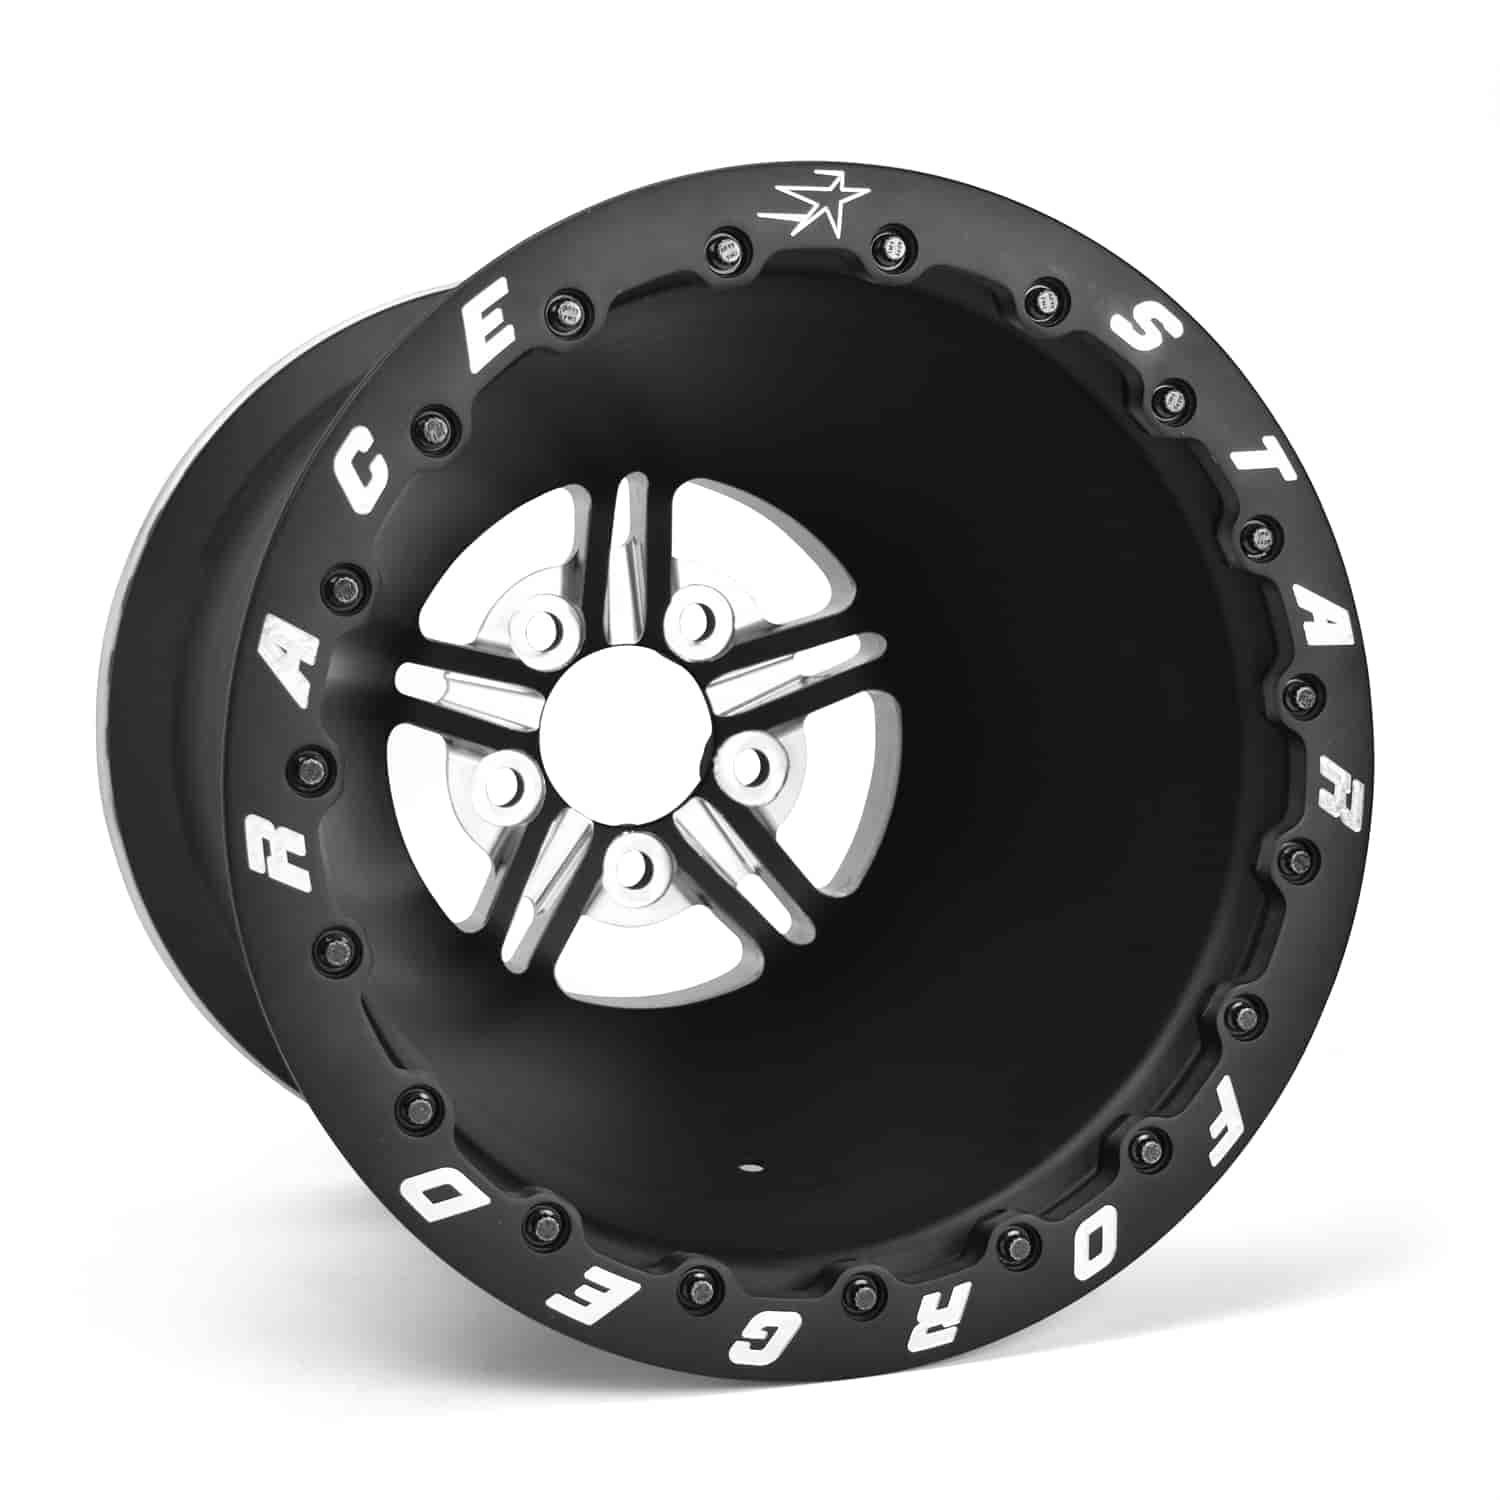 63-Series Pro Forged Double Bead-Lock Top Fuel Wheel Size: 16" x 16"